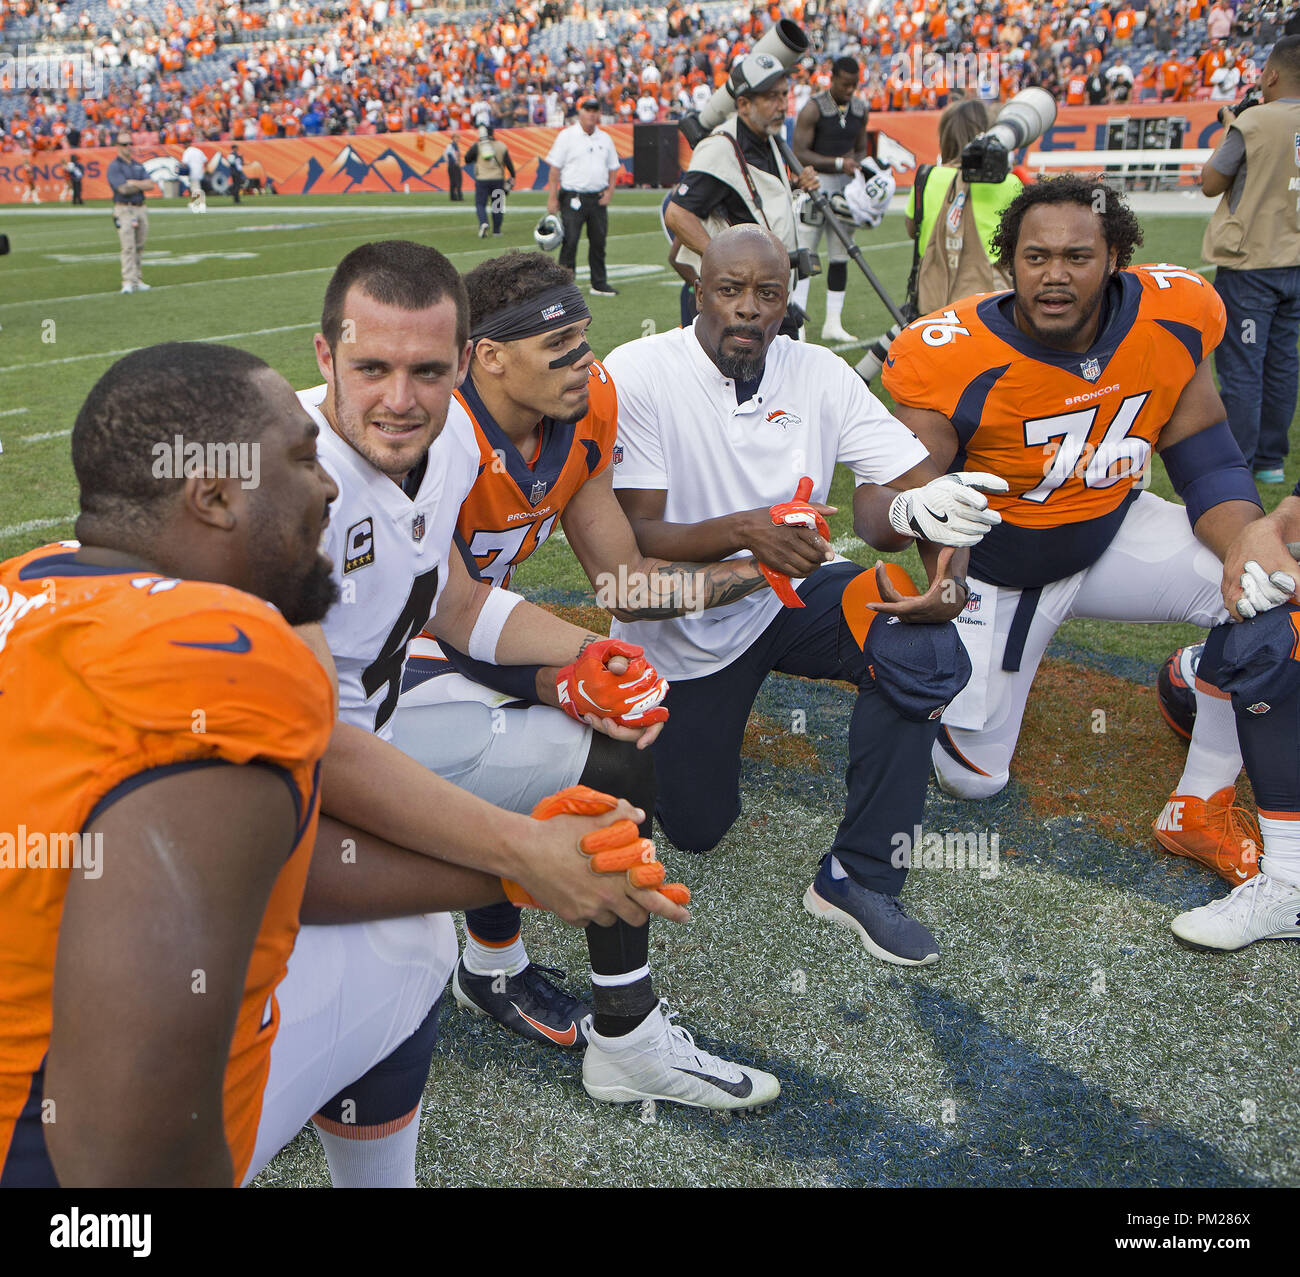 Denver, Colorado, USA. 16th Sep, 2018. Raiders QB DEREK CARR, second from the left, readies to pray with other Broncos and Raiders after the game at Broncos Stadium at Mile High Sunday afternoon. The Broncos beat the Raiders 20-19. Credit: Hector Acevedo/ZUMA Wire/Alamy Live News Stock Photo